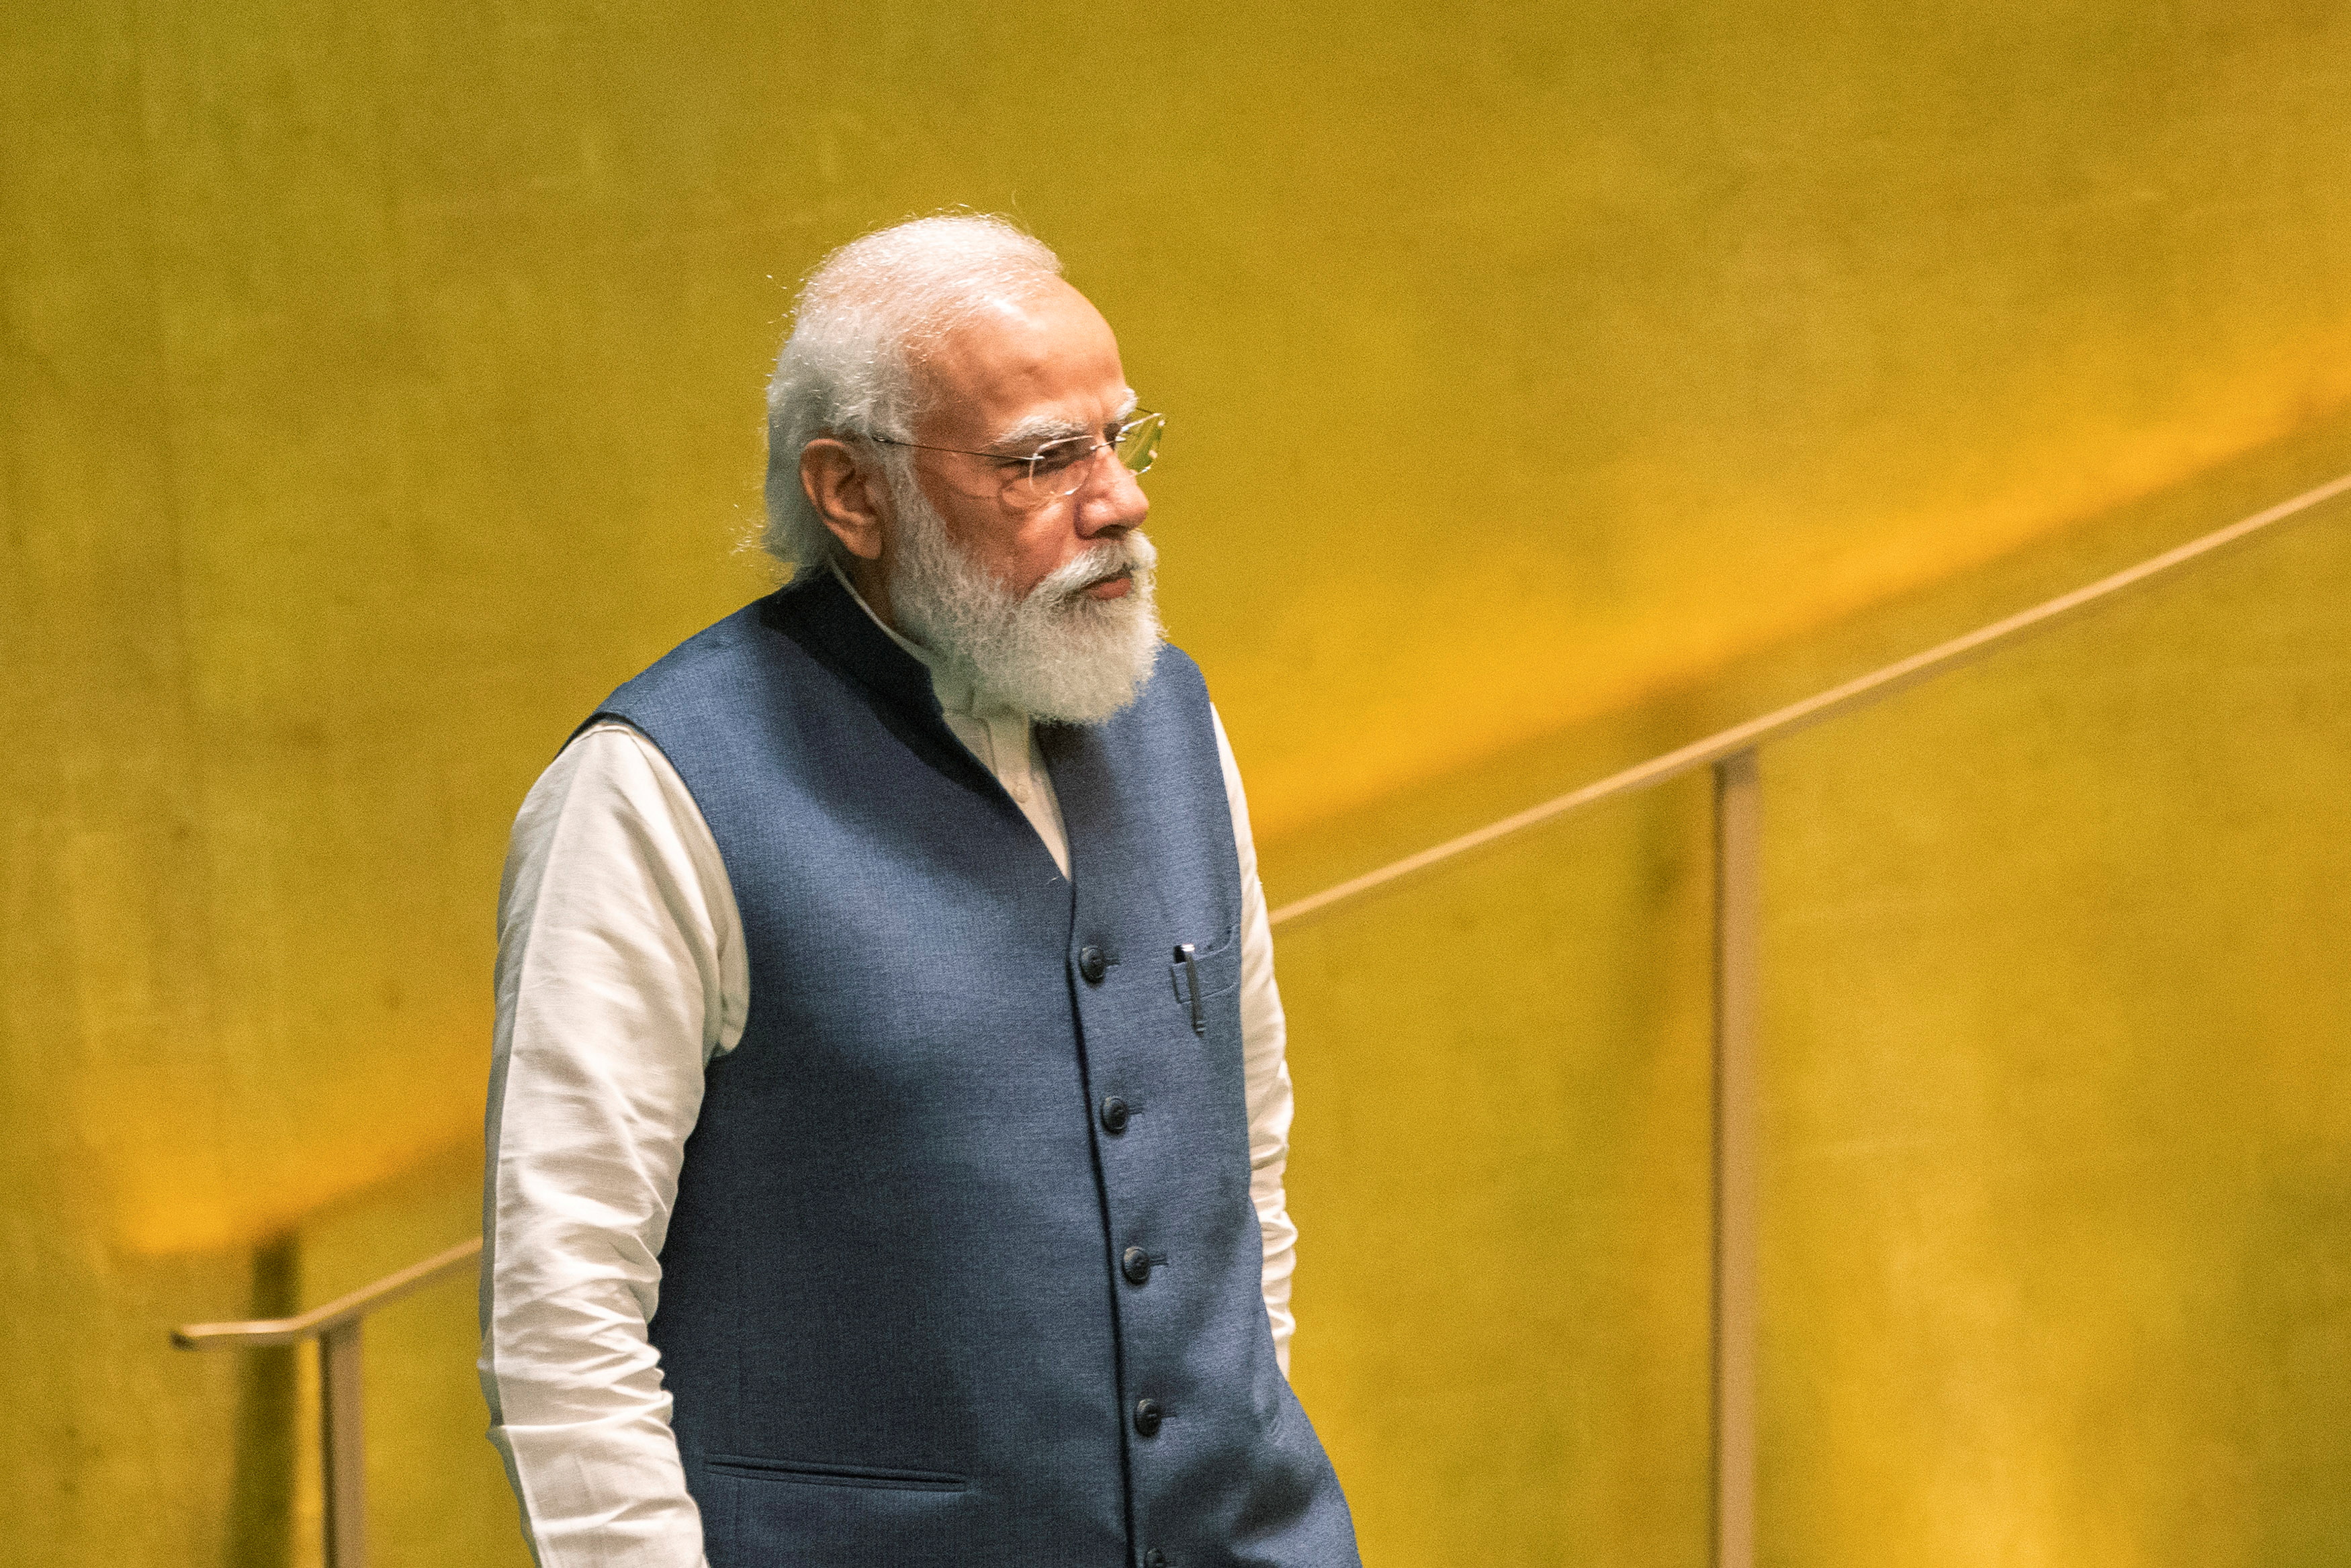 India's Prime Minister Narendra Modi addresses the 76th Session of the U.N. General Assembly in New York City